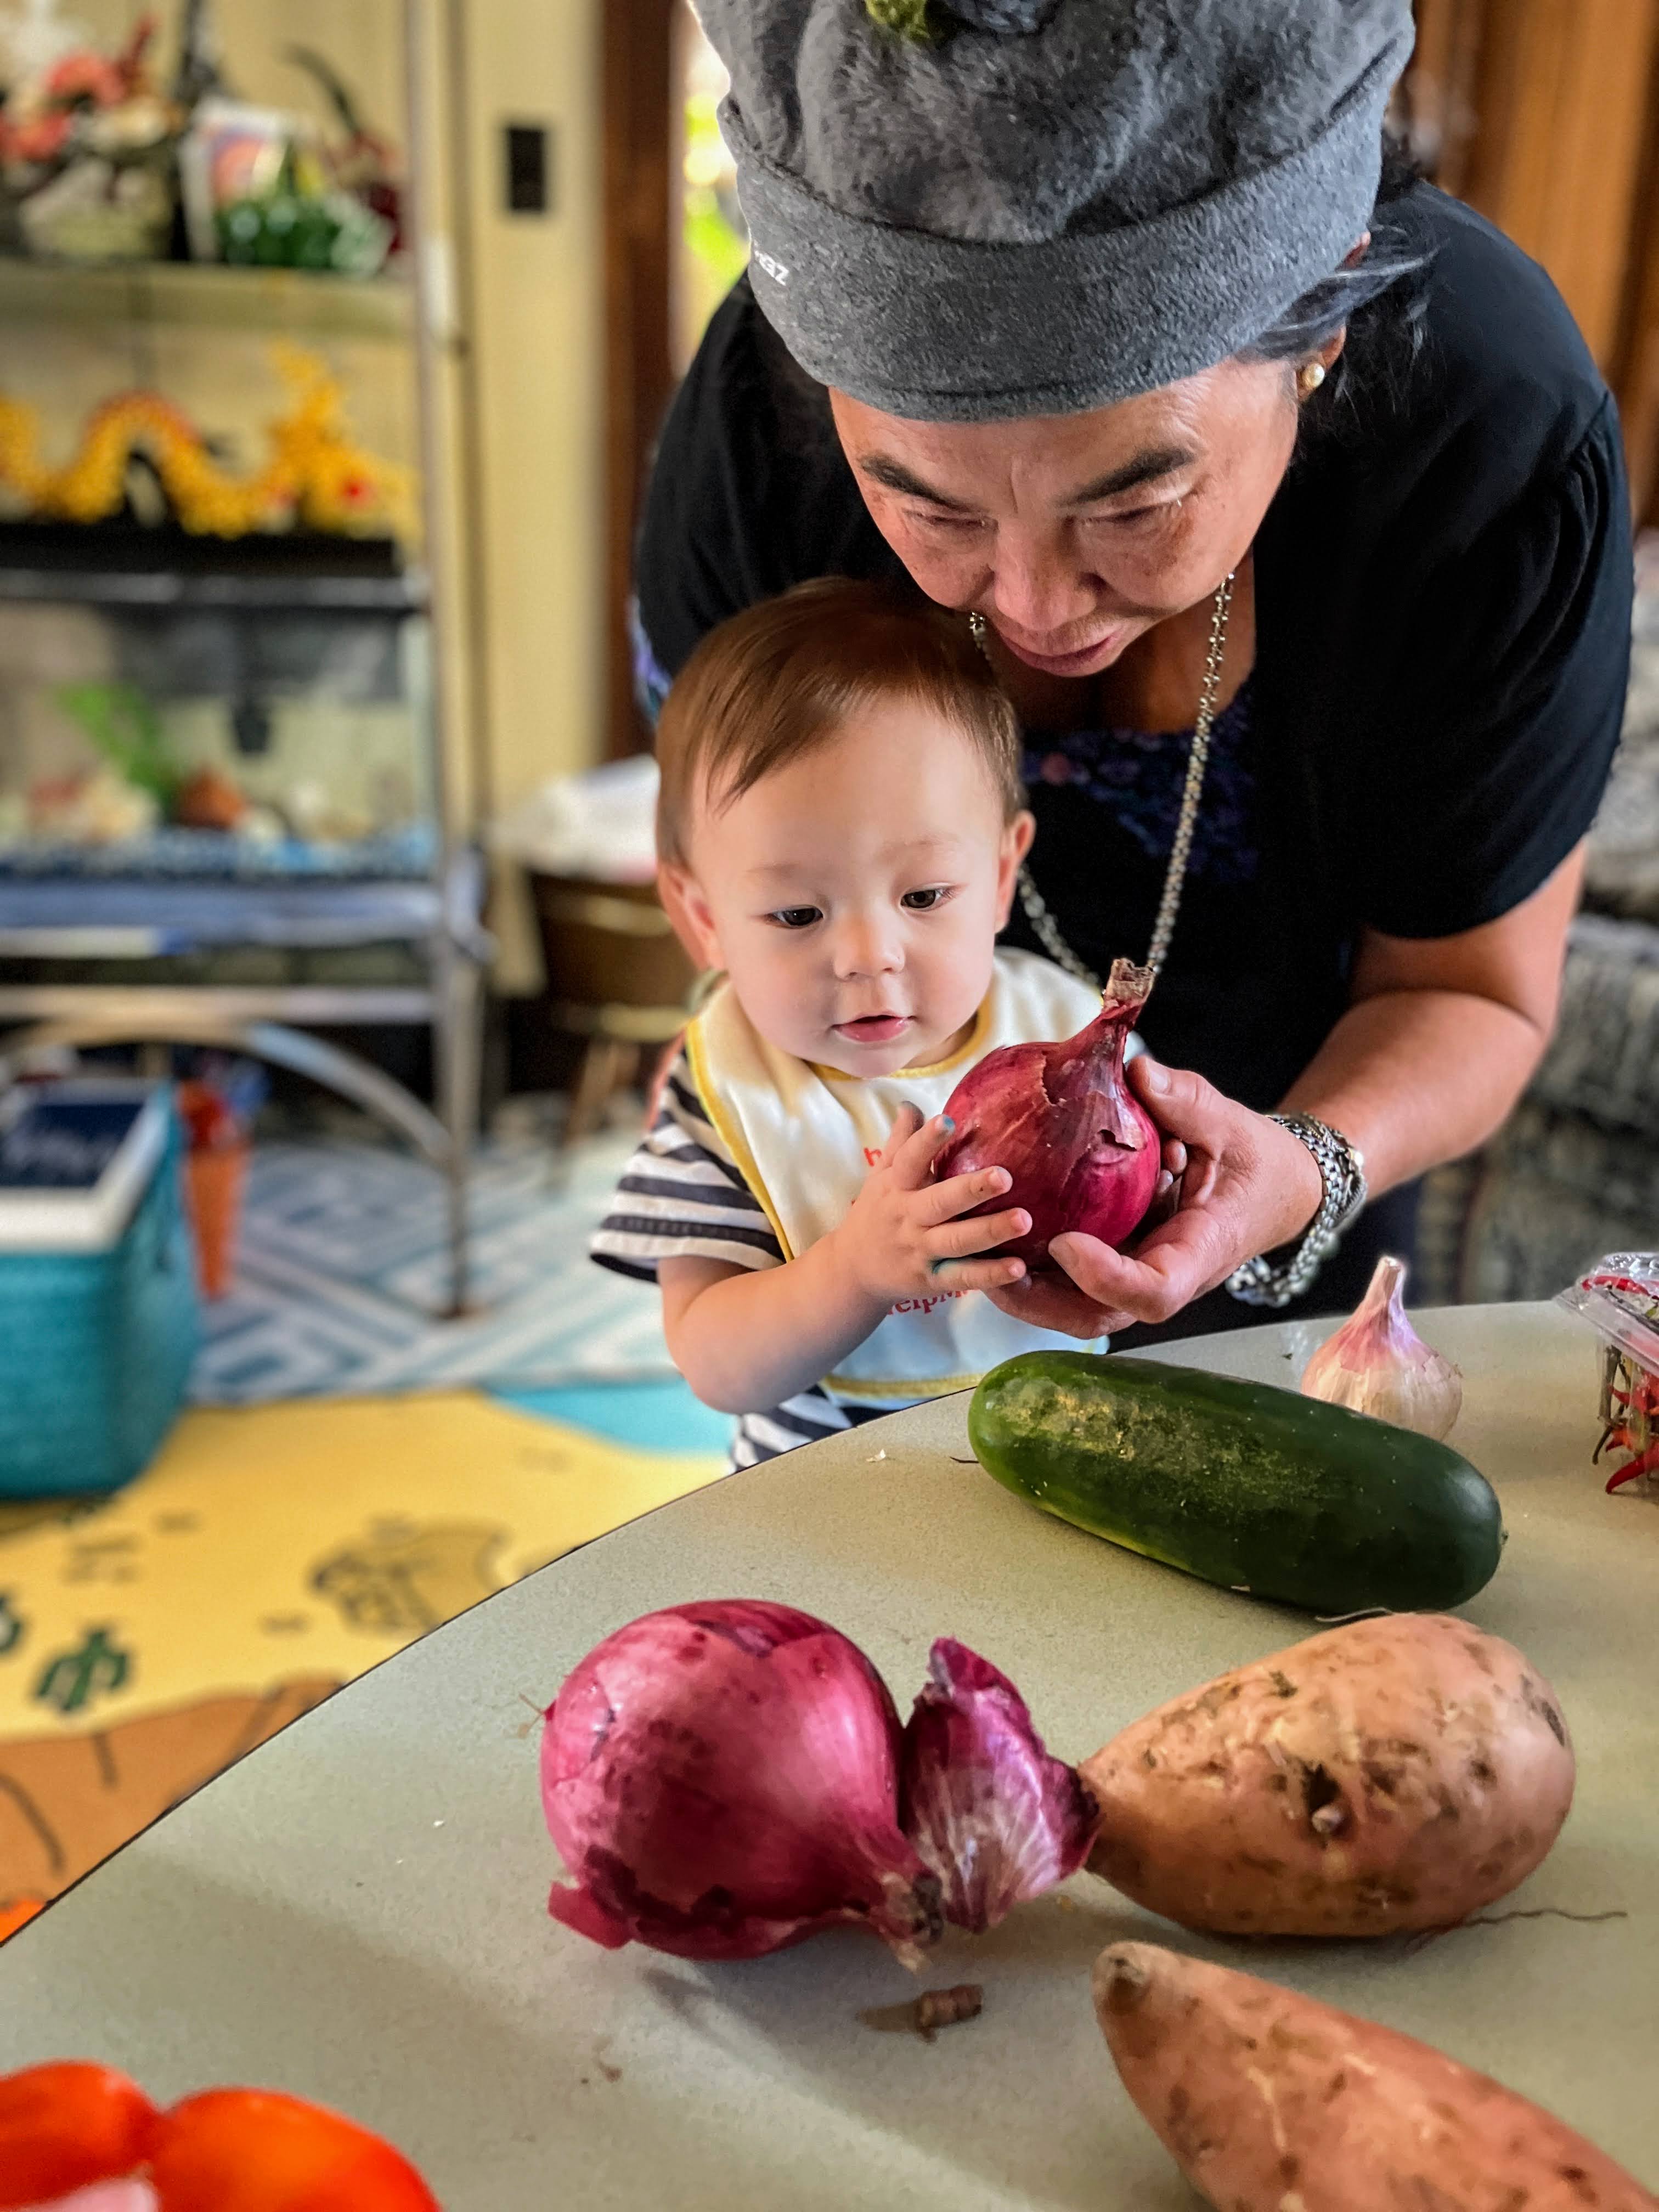 Early care provider Souvanh Thao shows HAFA CSA vegetables to a child